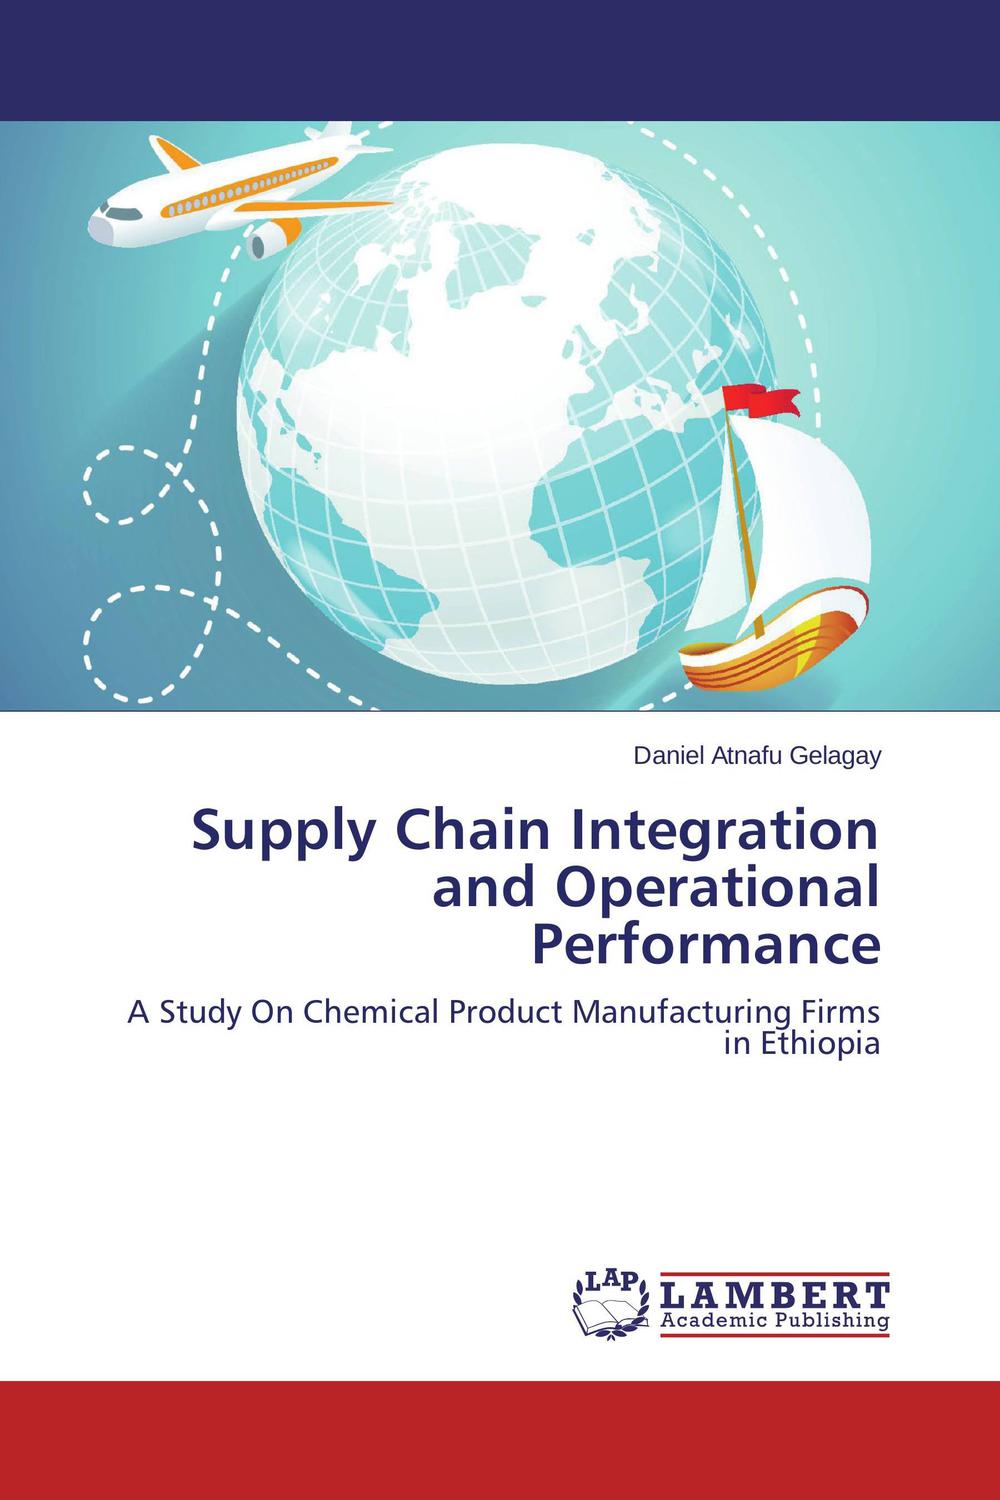 supply chain integration and operational performance a study on chemical product manufacturing firms in